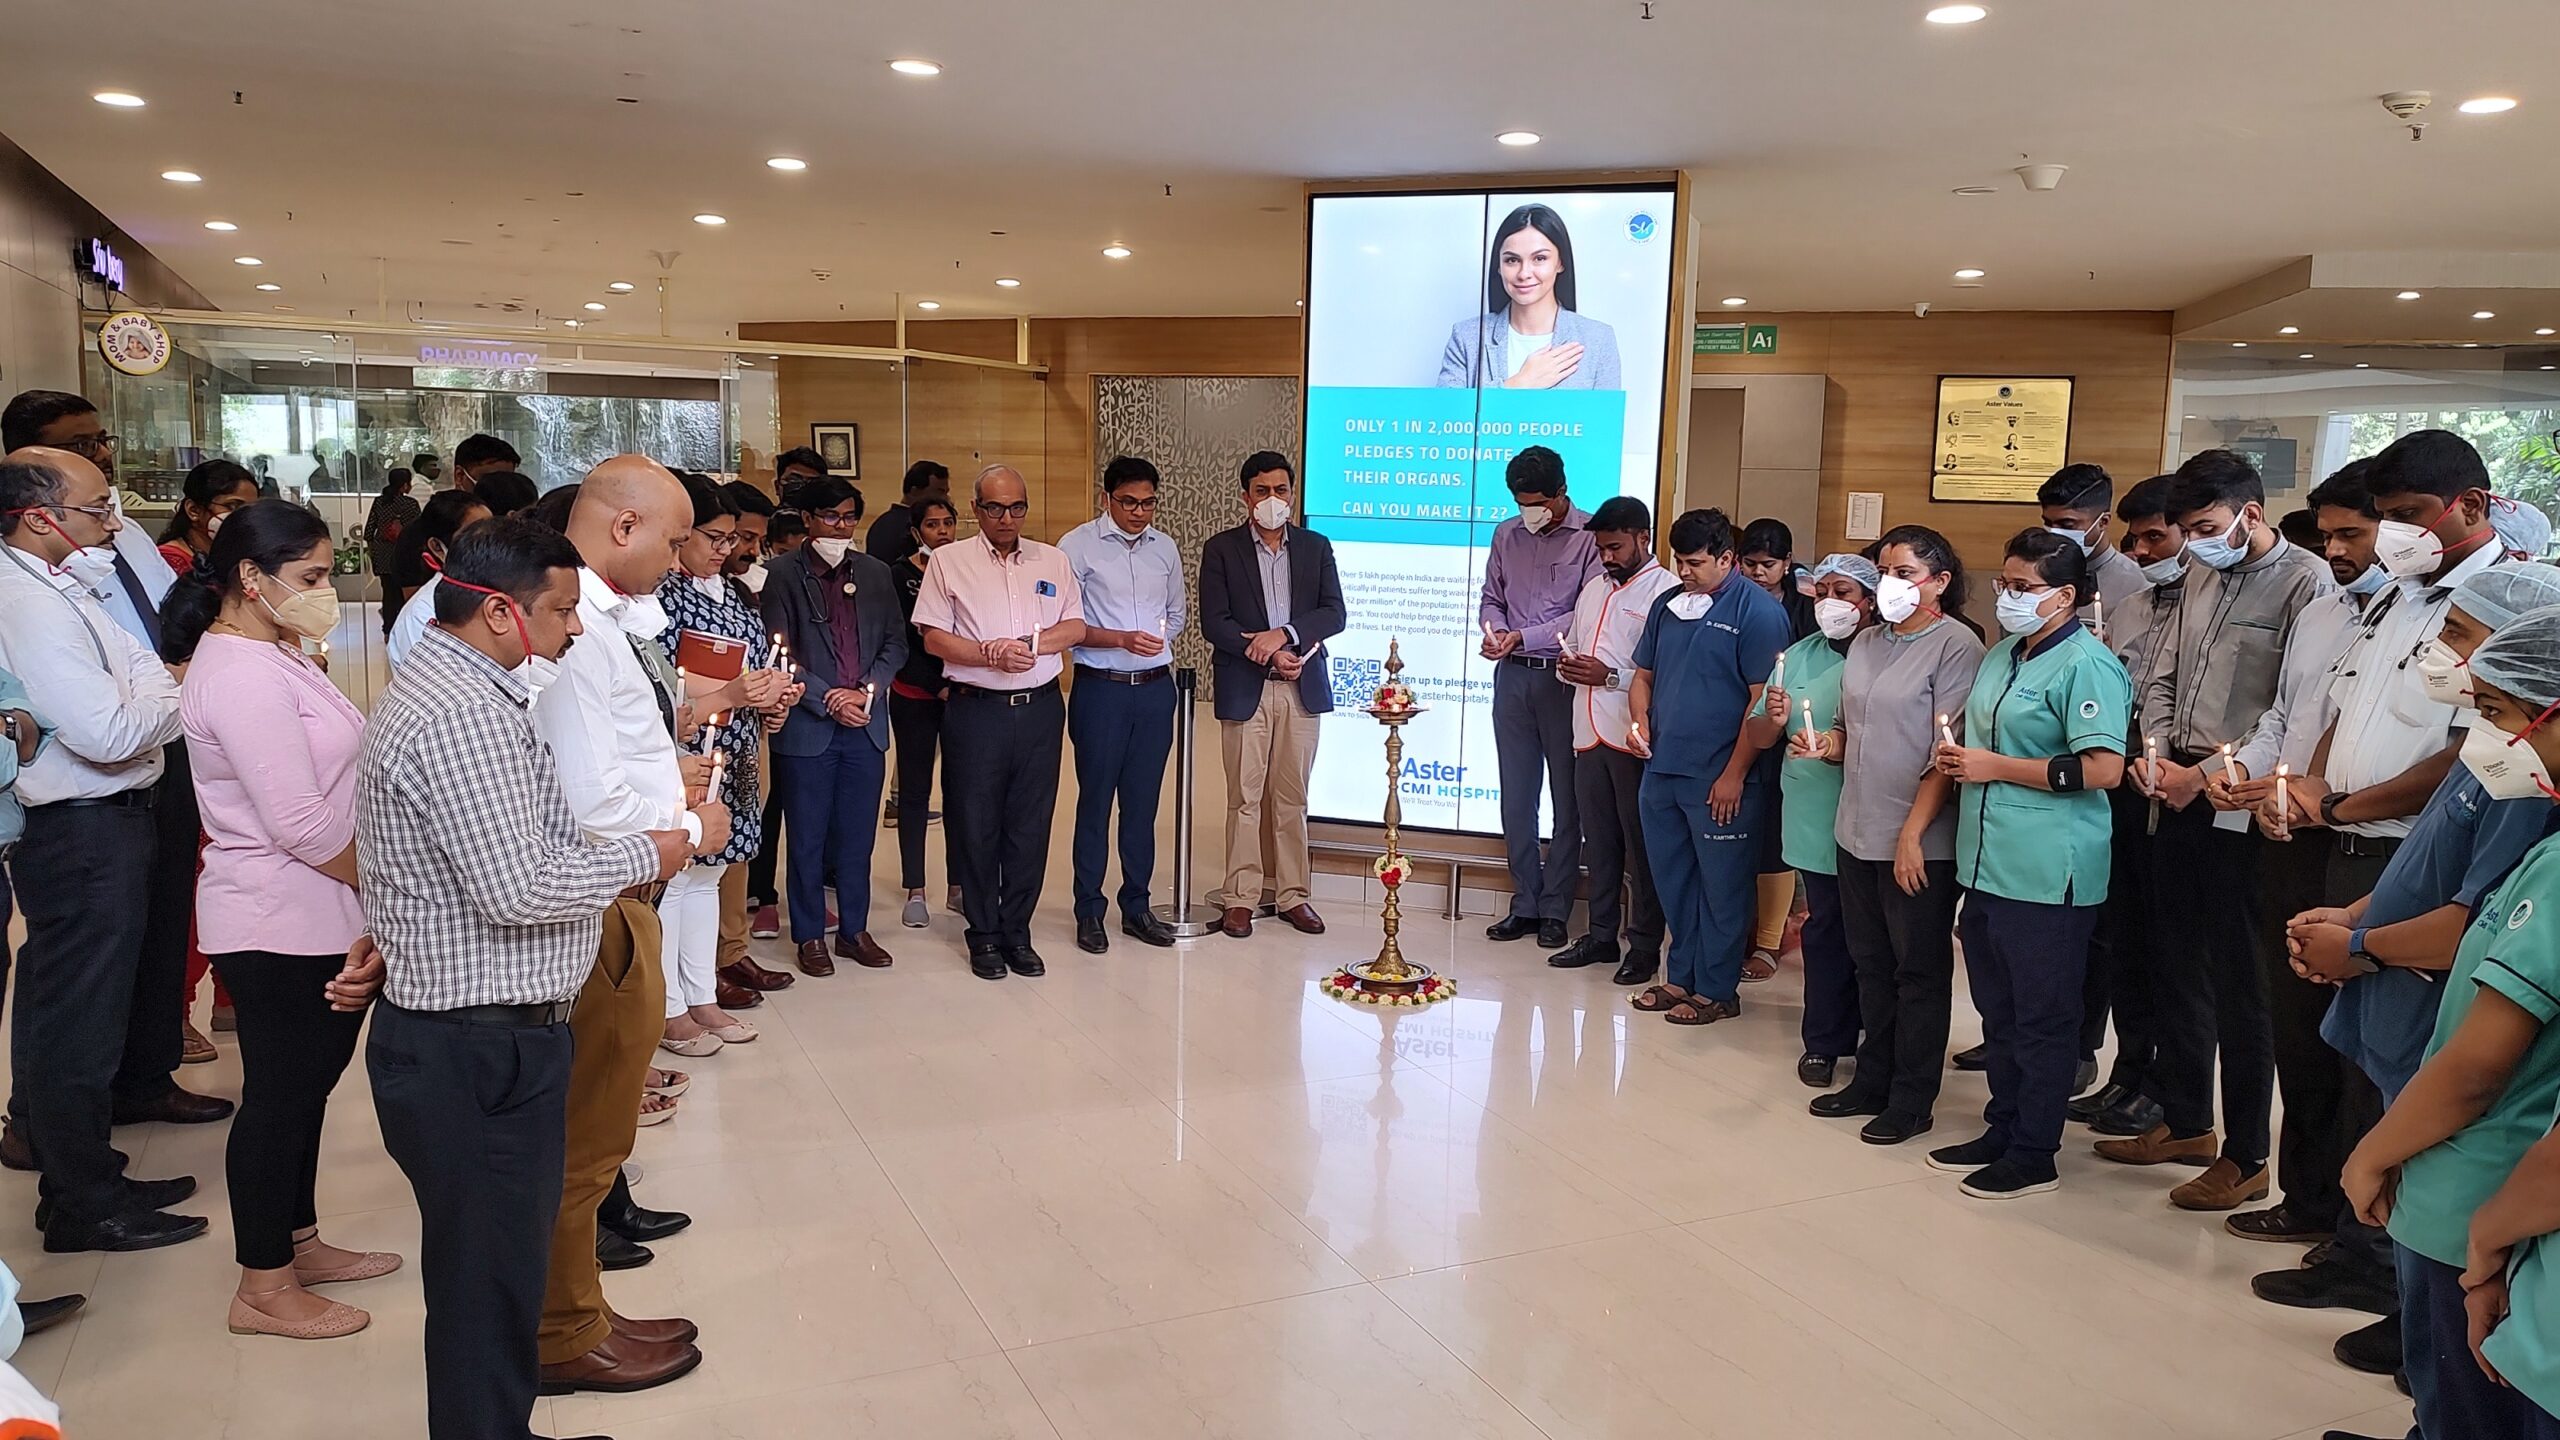 World Organ Donation Day 2022: Aster CMI Hospital pays tribute to organ donors, the selfless unsung heroes.